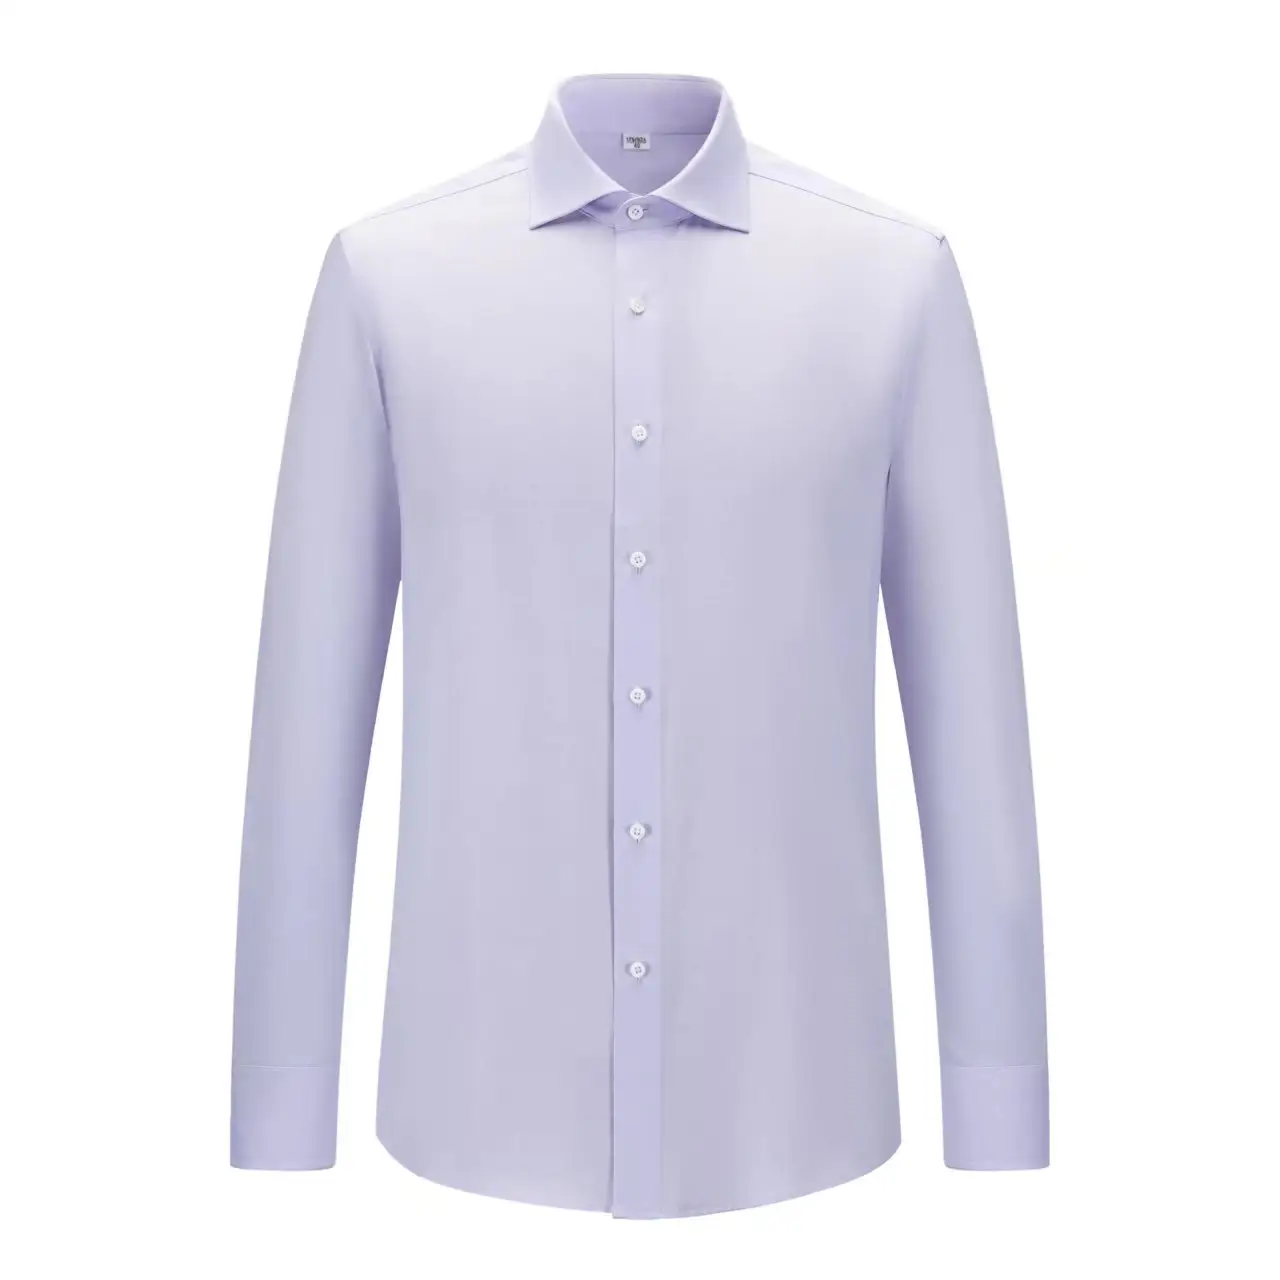 Business shirt, comfortable fabric suitable for all occasions, light, breathable and not stuffy.